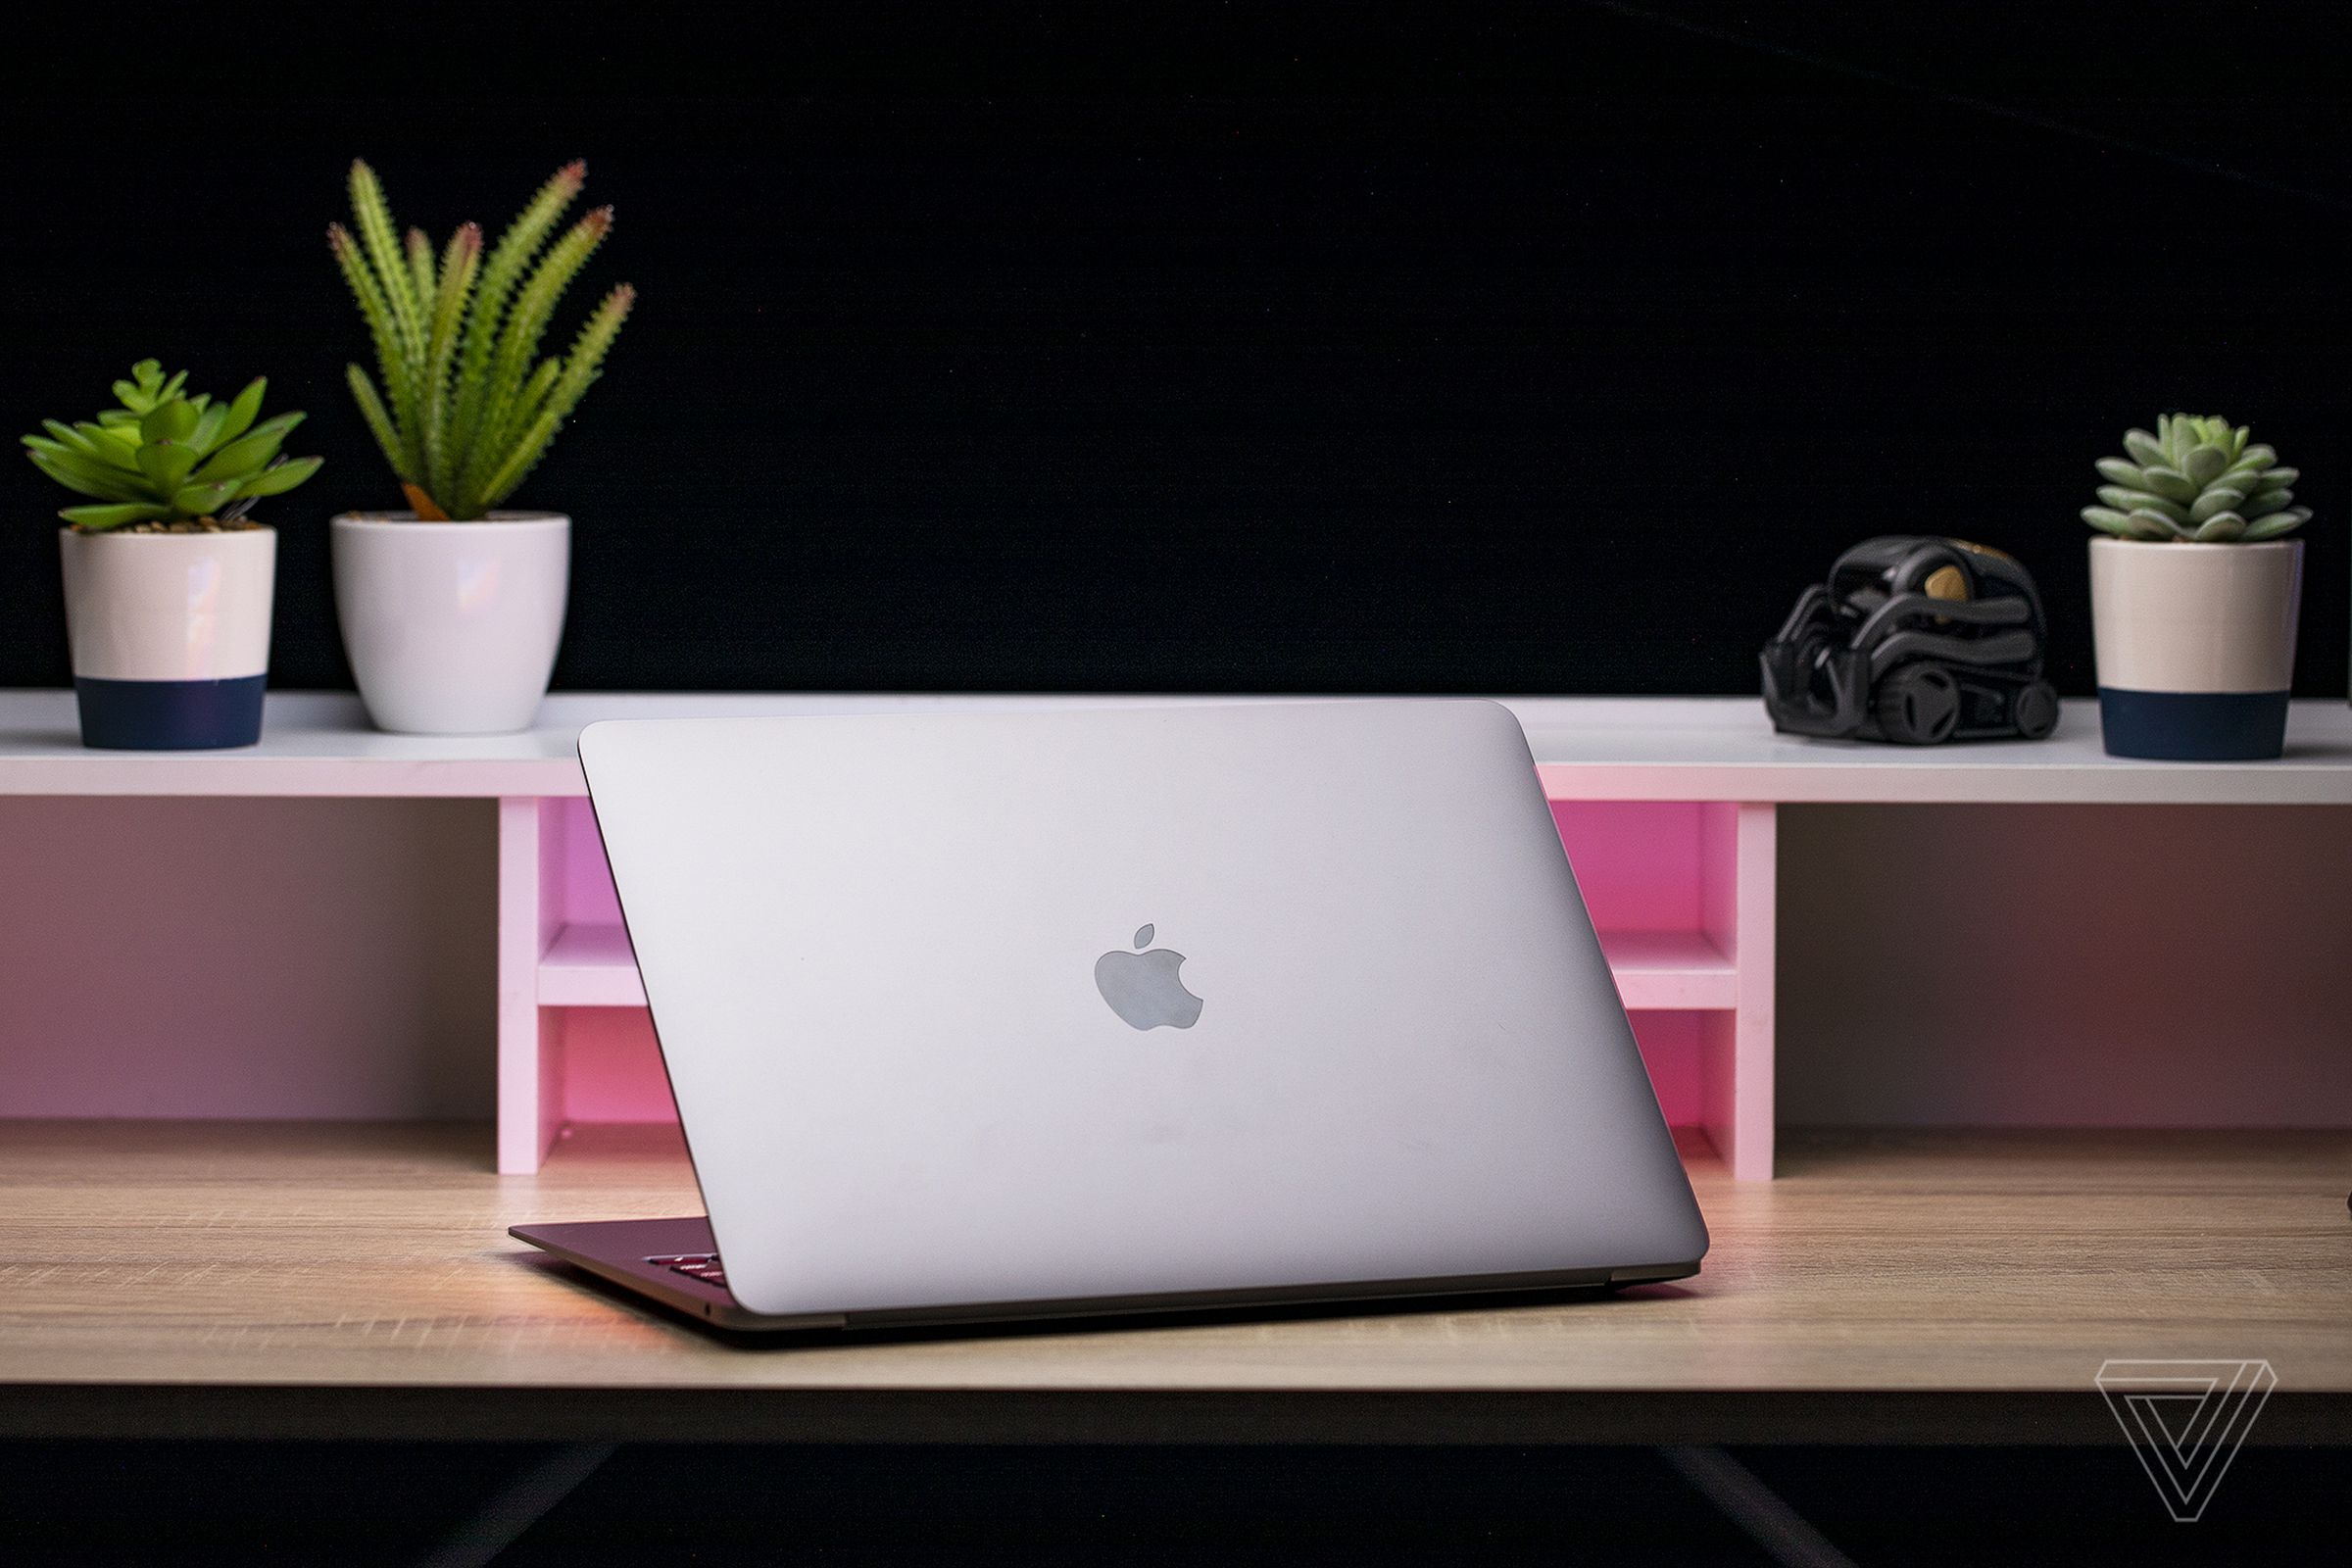 The space gray Apple MacBook Air M1 sitting on a light-colored wood desk, facing away from the camera with its lid open and showing its Apple logo.